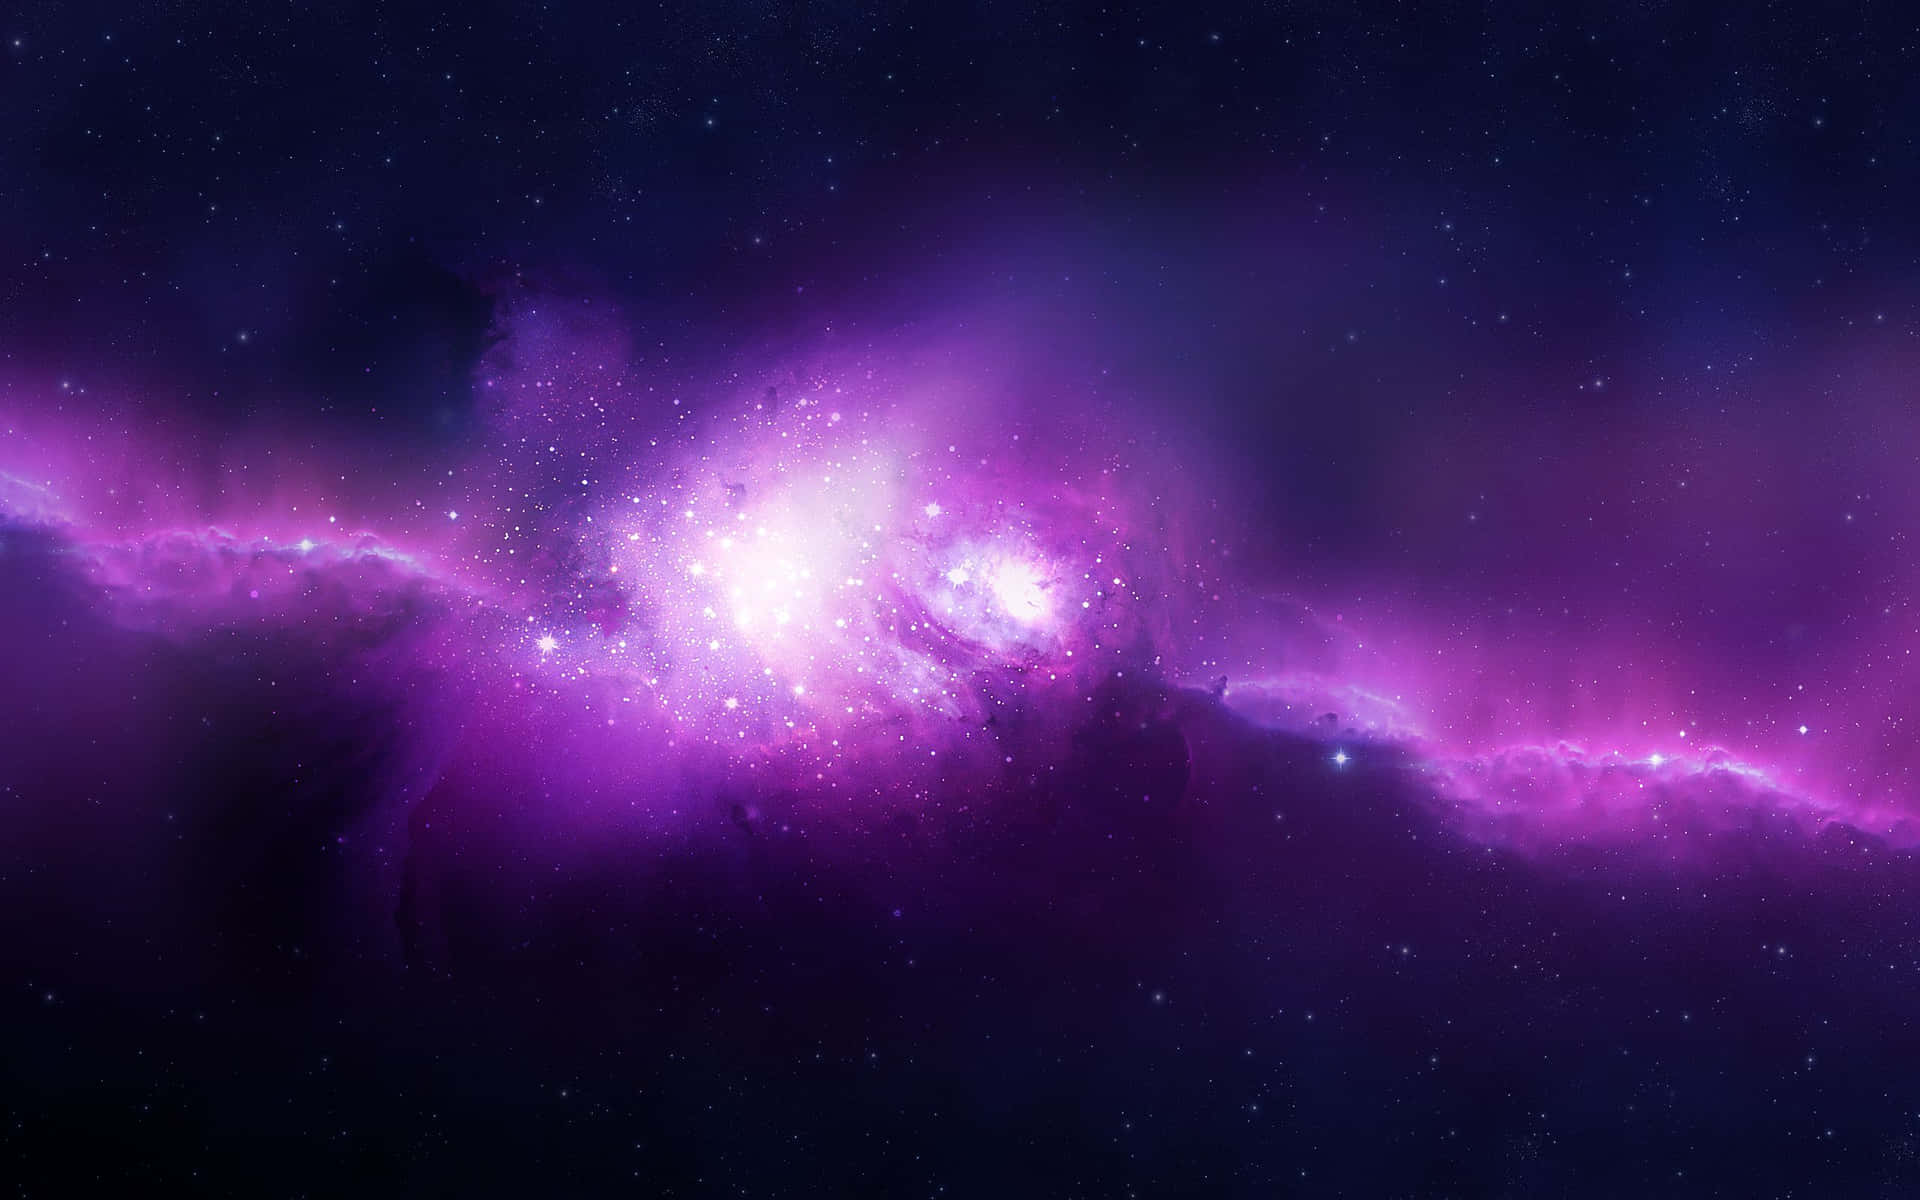 A Glowing Celestial Space Wallpaper